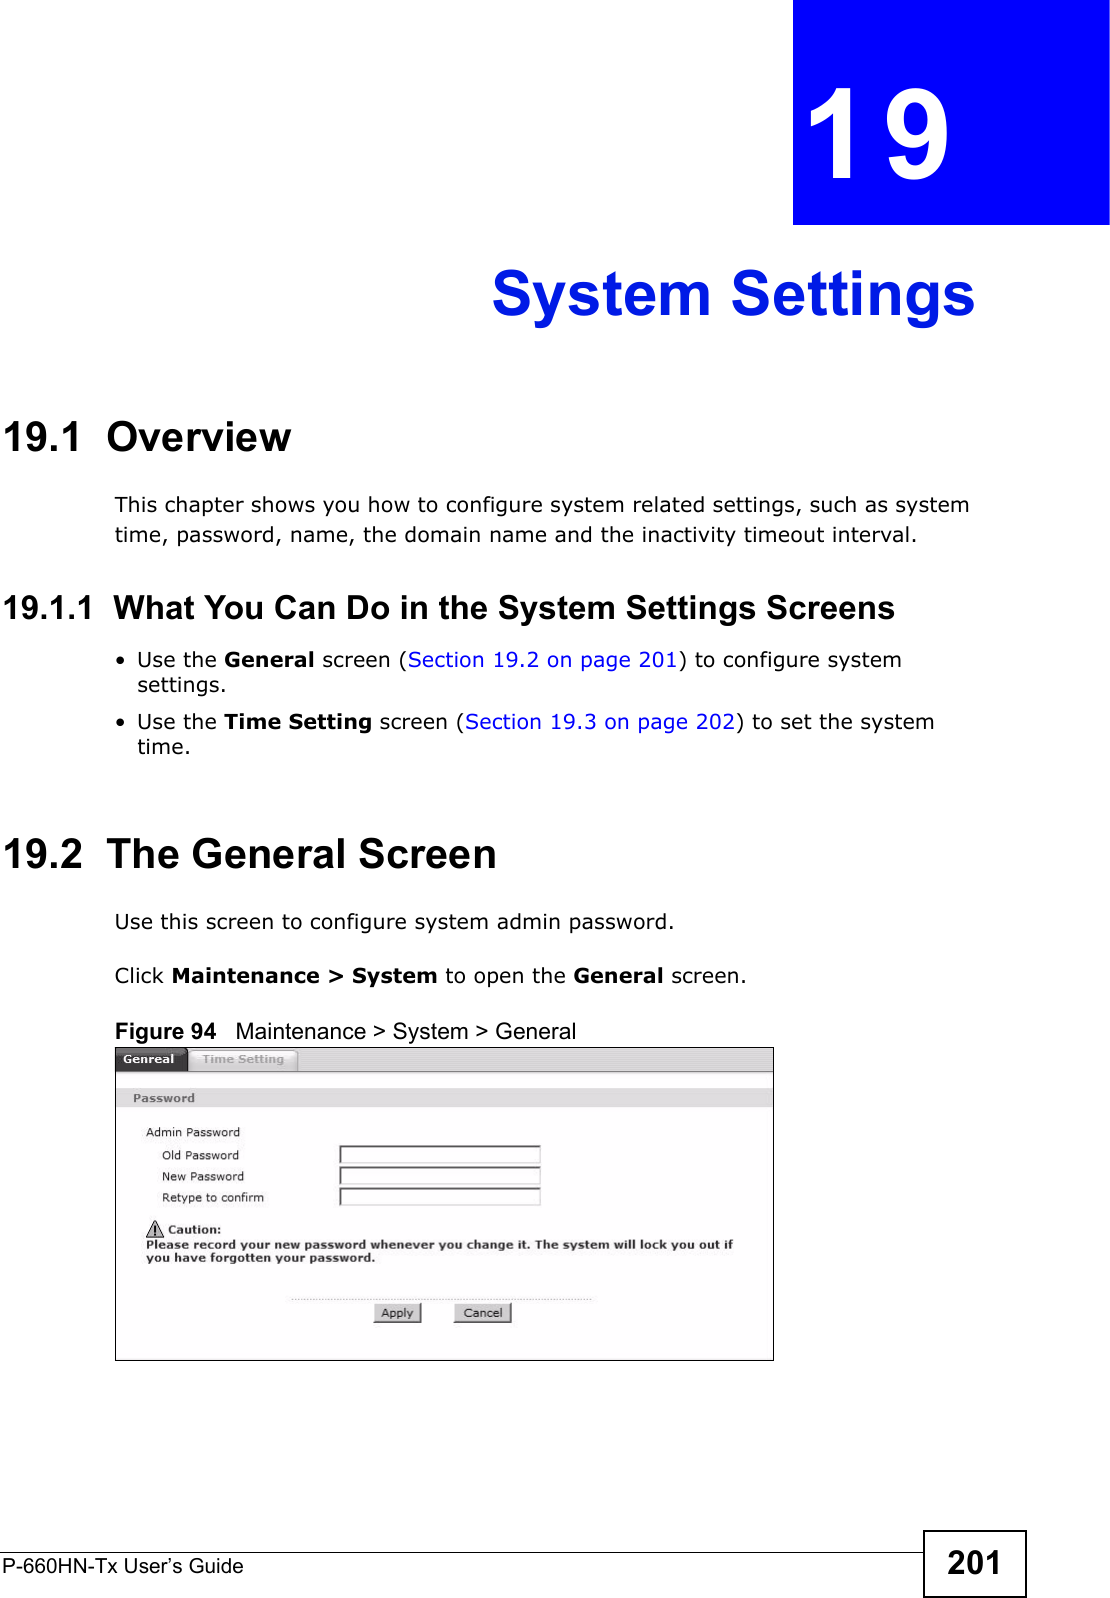 P-660HN-Tx User’s Guide 201CHAPTER  19 System Settings19.1  OverviewThis chapter shows you how to configure system related settings, such as system time, password, name, the domain name and the inactivity timeout interval.    19.1.1  What You Can Do in the System Settings Screens•Use the General screen (Section 19.2 on page 201) to configure system settings.•Use the Time Setting screen (Section 19.3 on page 202) to set the system time.19.2  The General ScreenUse this screen to configure system admin password.Click Maintenance &gt; System to open the General screen. Figure 94   Maintenance &gt; System &gt; General